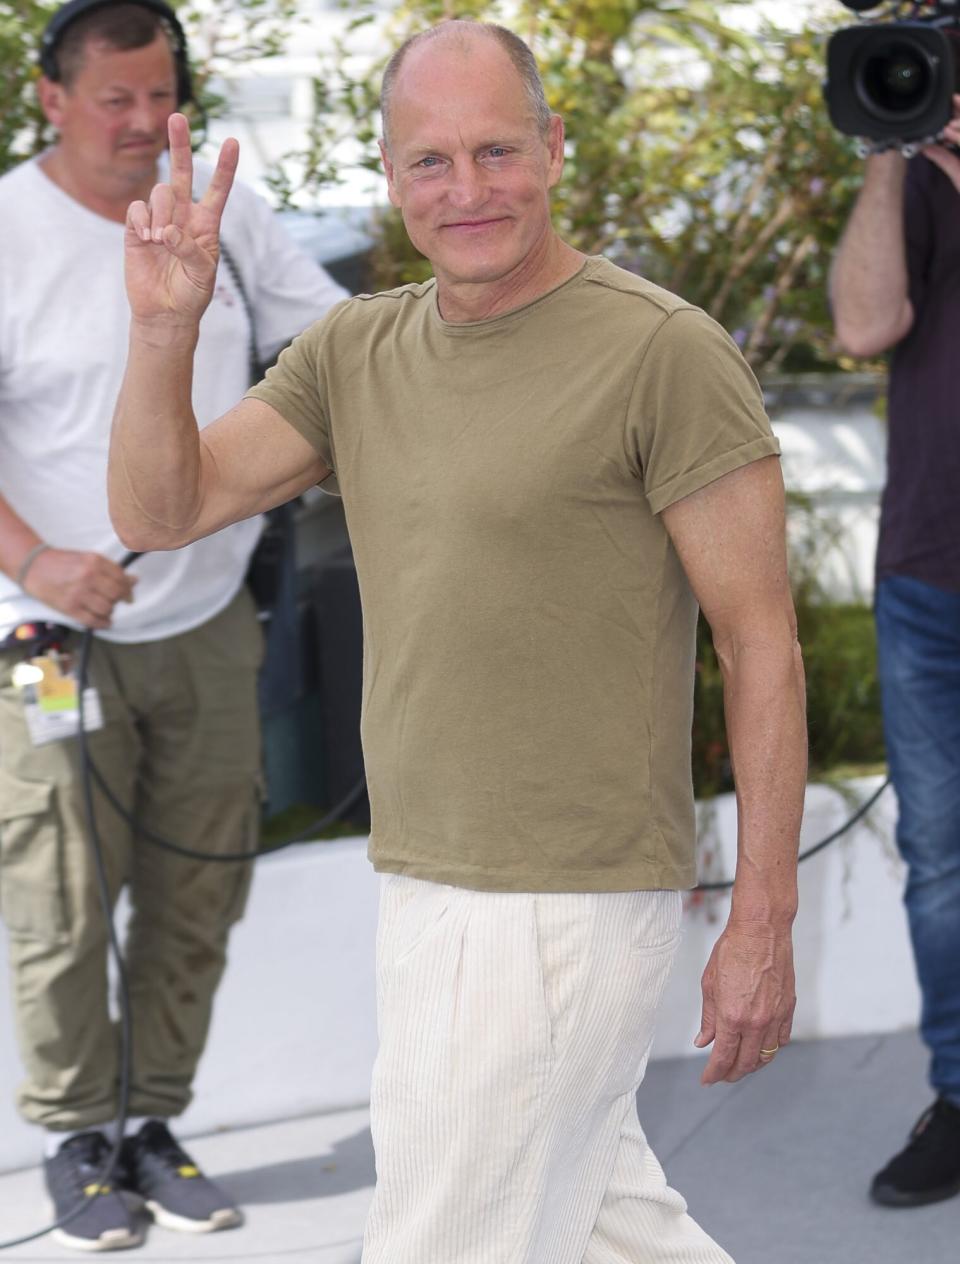 CANNES, FRANCE - MAY 22: Woody Harrelson attends the photocall for "Triangle Of Sadness" during the 75th annual Cannes film festival at Palais des Festivals on May 22, 2022 in Cannes, France. (Photo by Mike Marsland/WireImage)